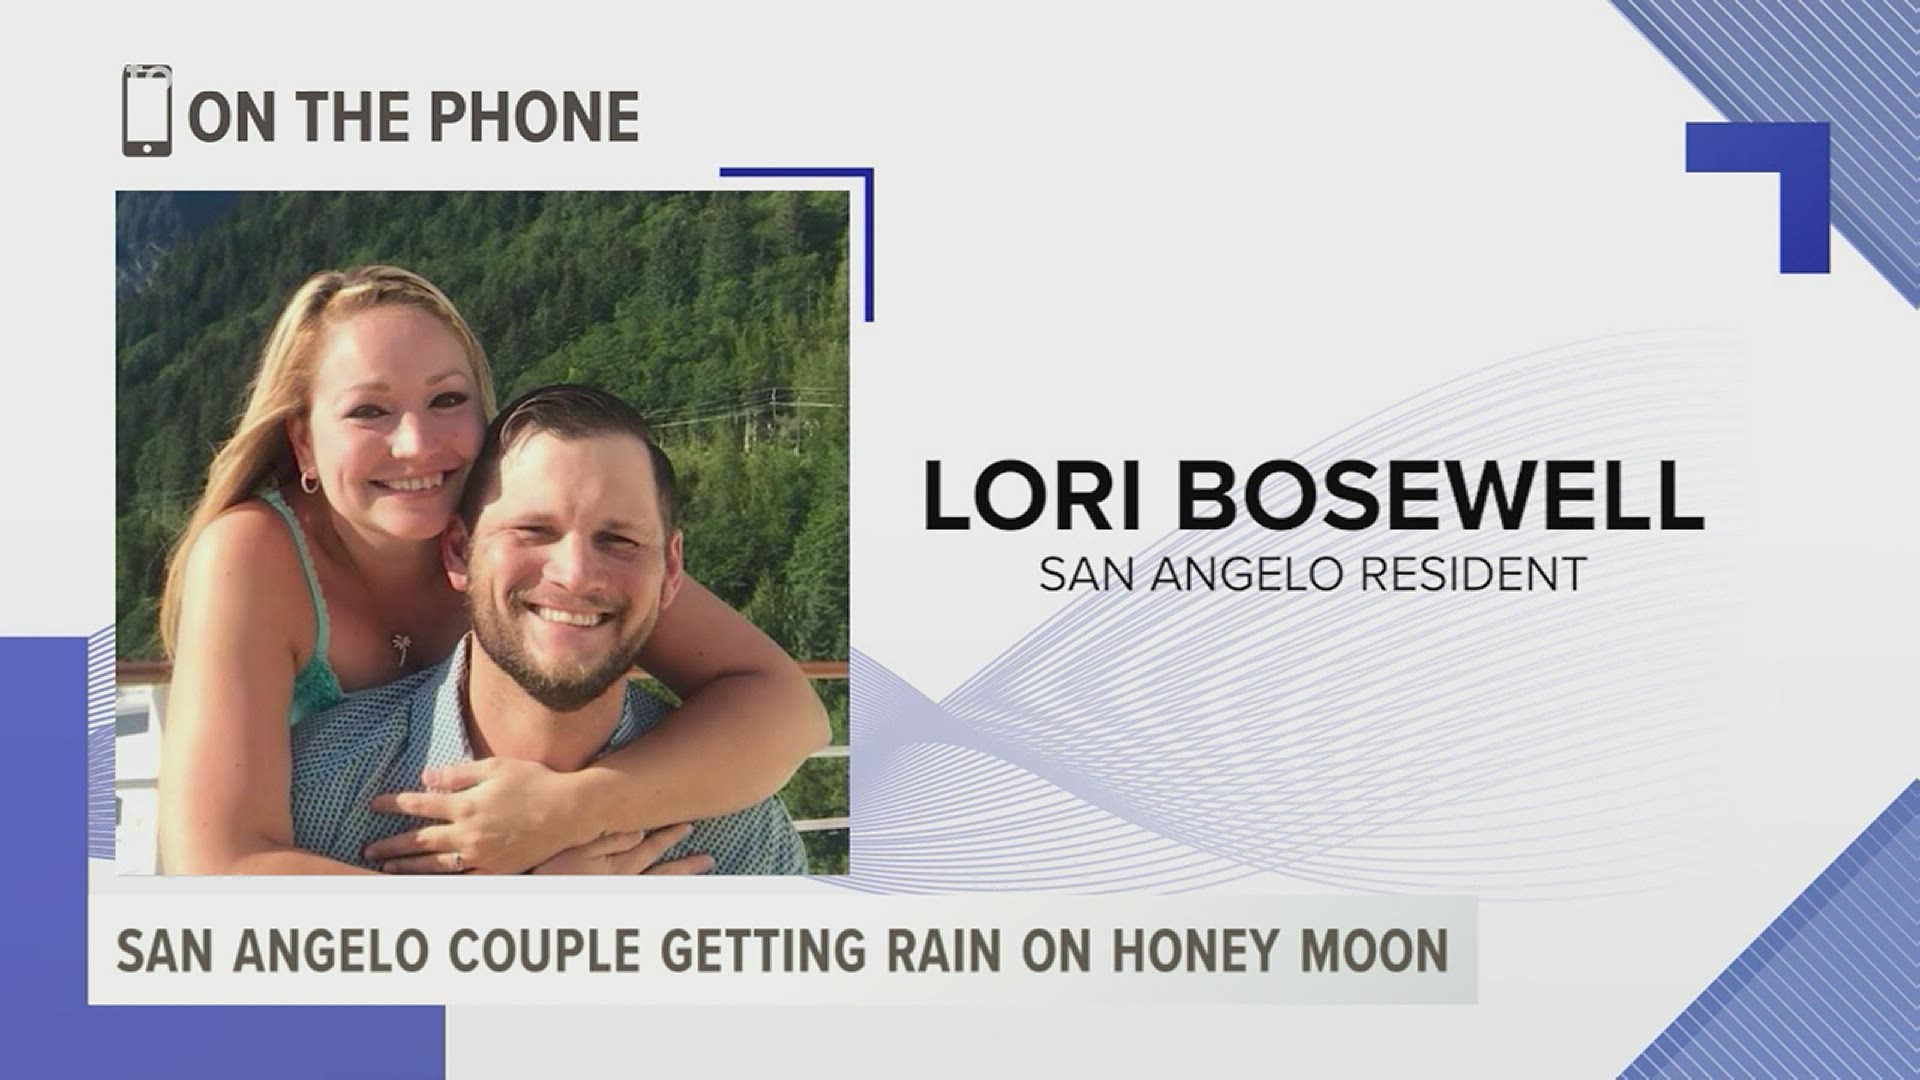 Lori and Shane Boswell booked a honeymoon trip to Rockport, expecting to get away for a few days. They didn't expect the downpour they received.